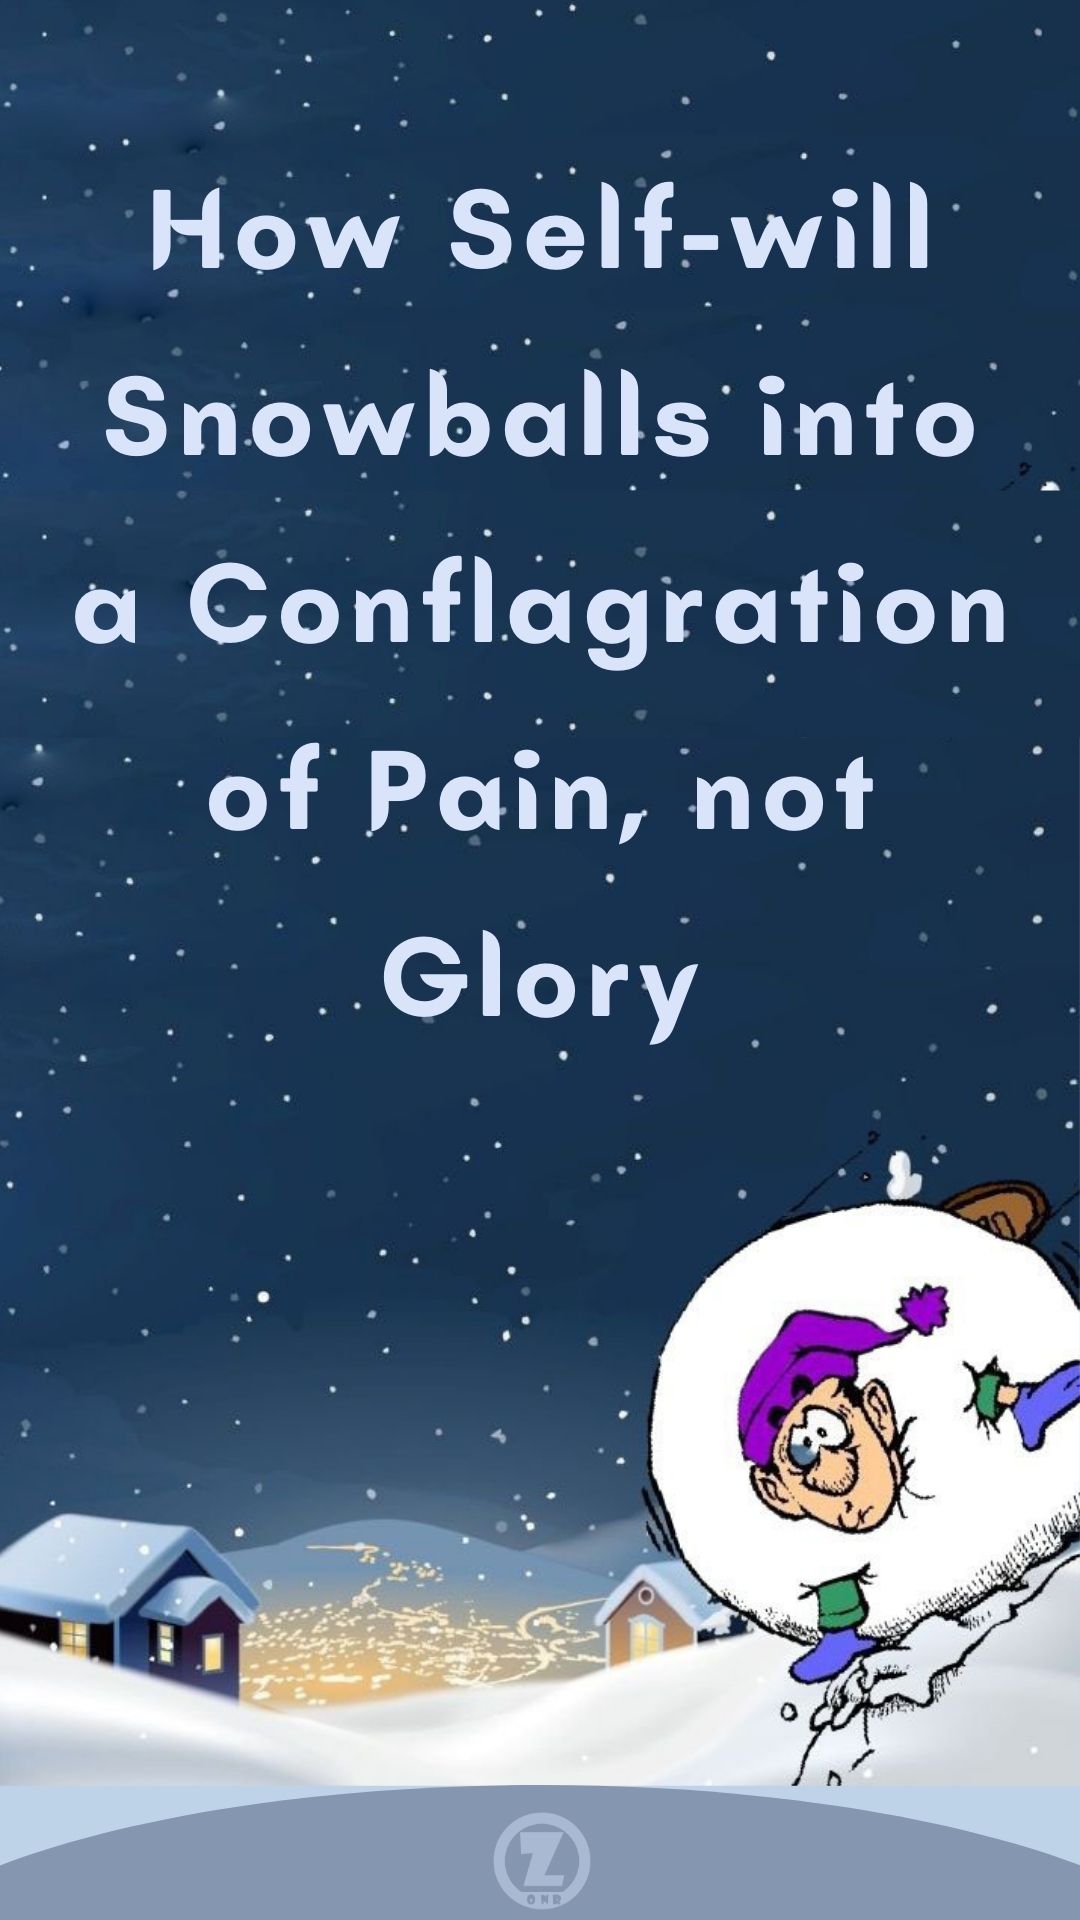 You are currently viewing How Self-will Snowballs into a Conflagration of Pain, not Glory – Step 1